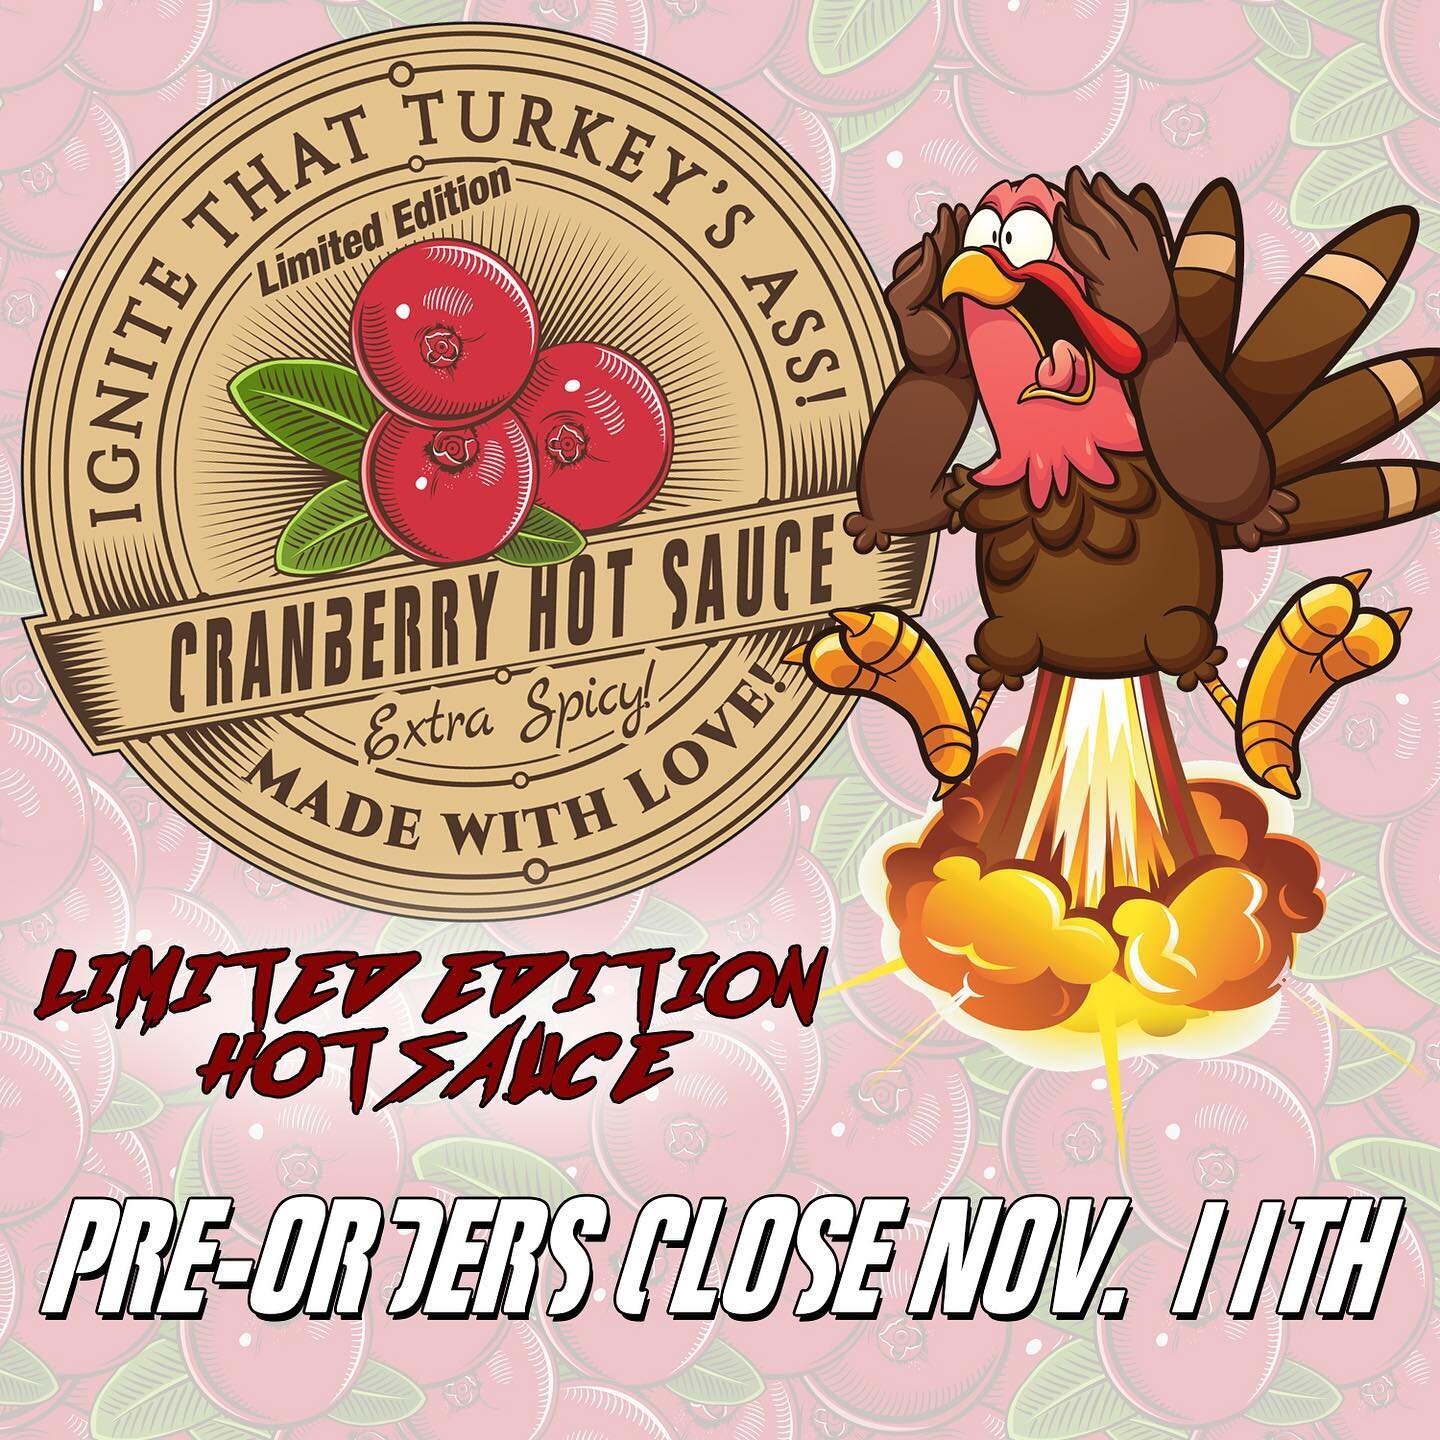 Pre-orders now open!!! One week only!

https://www.biteclubnoms.com/bc-sauces/cranberry-hot-sauce

#cranberry #hotsauce #limitedrun